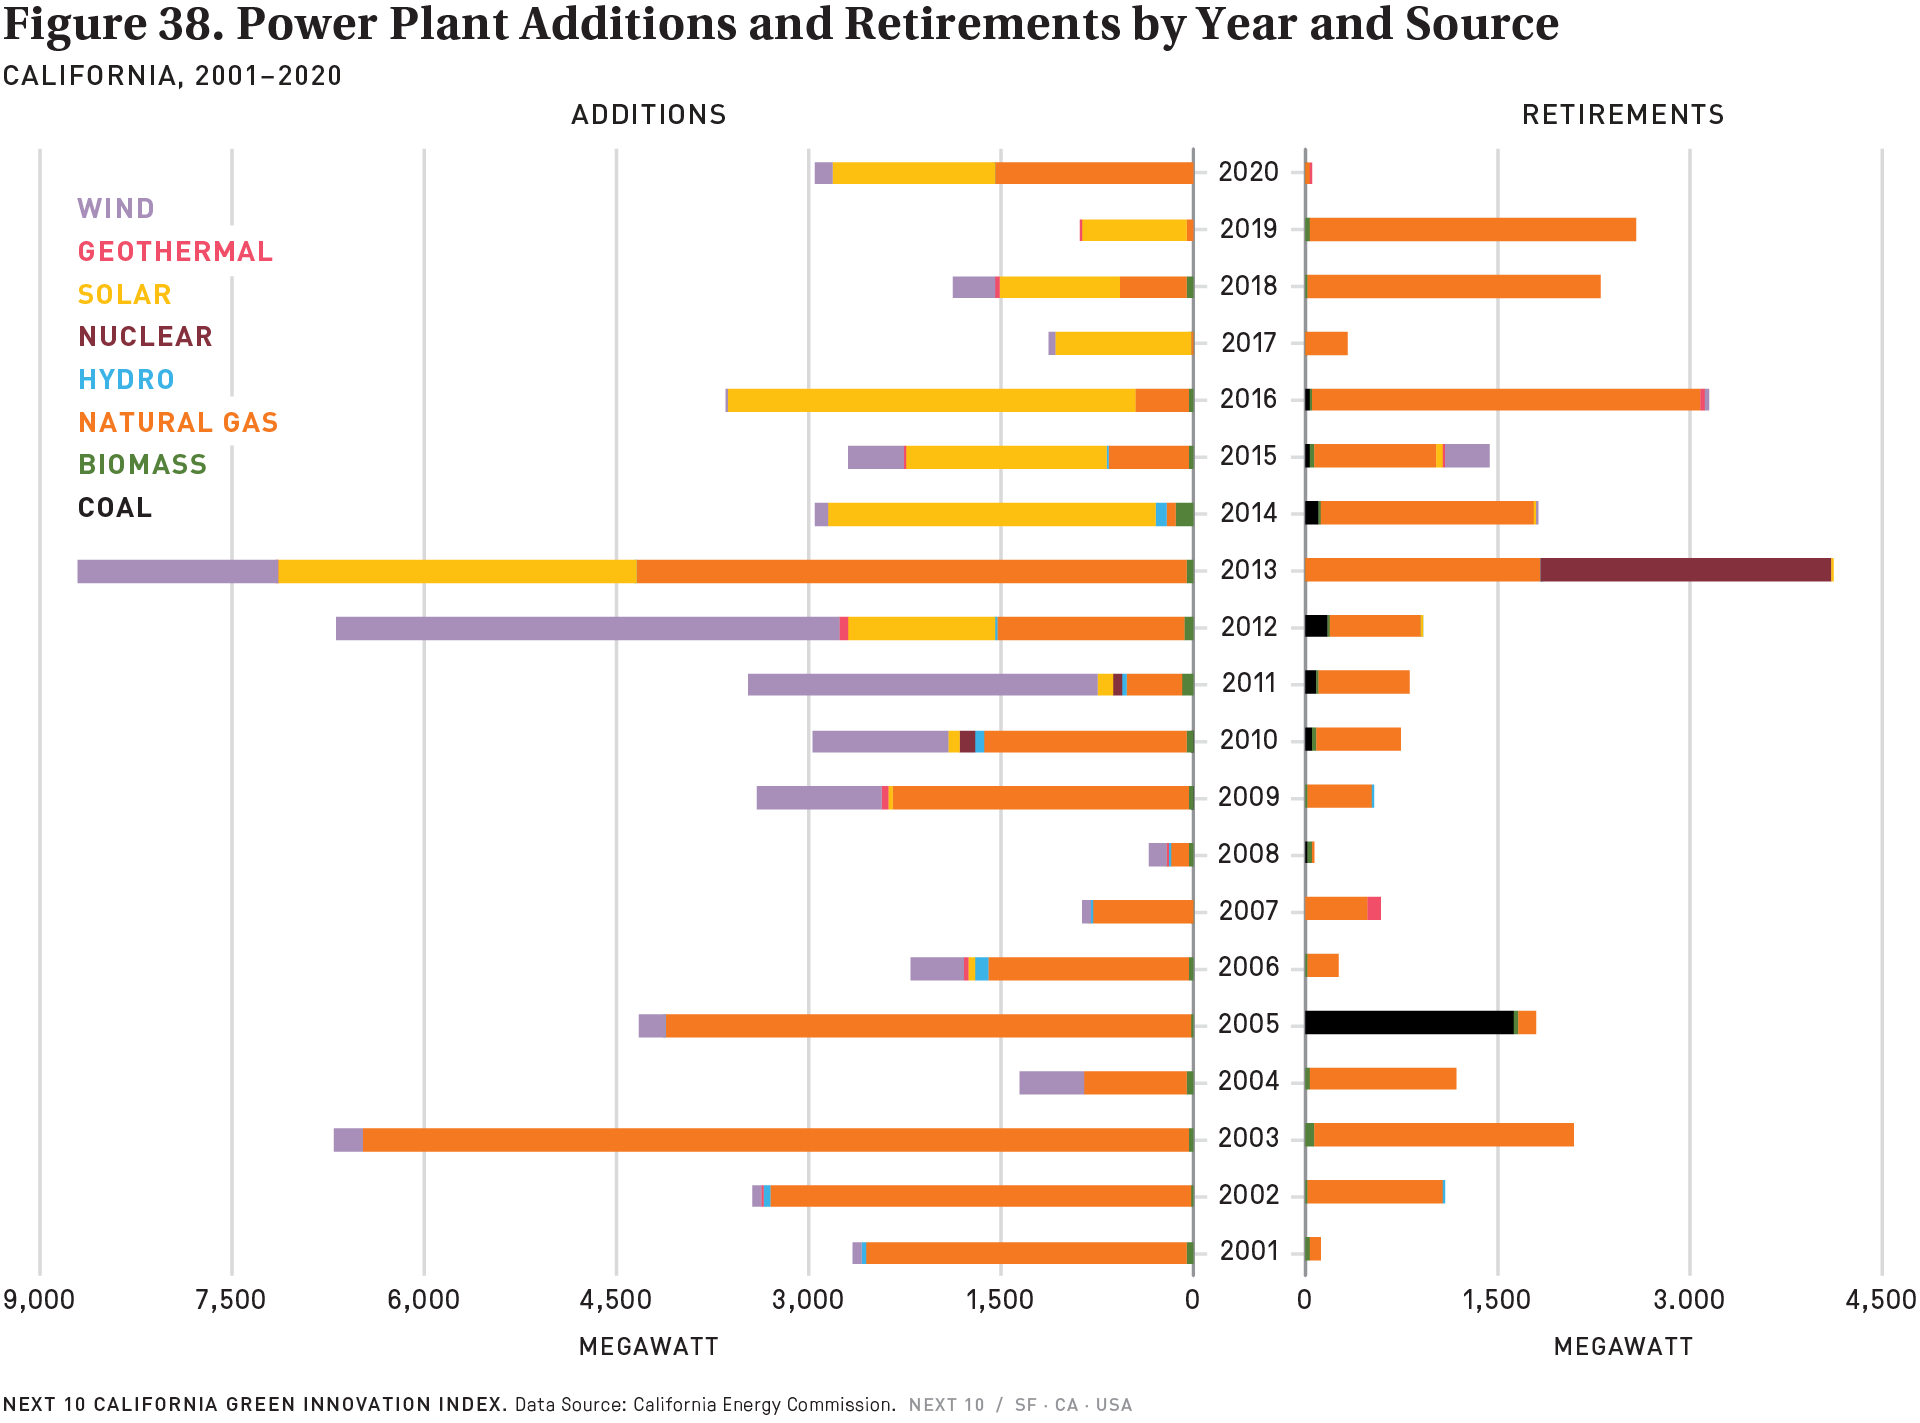 Figure 38. Power Plant Additions and Retirements by Year and Source